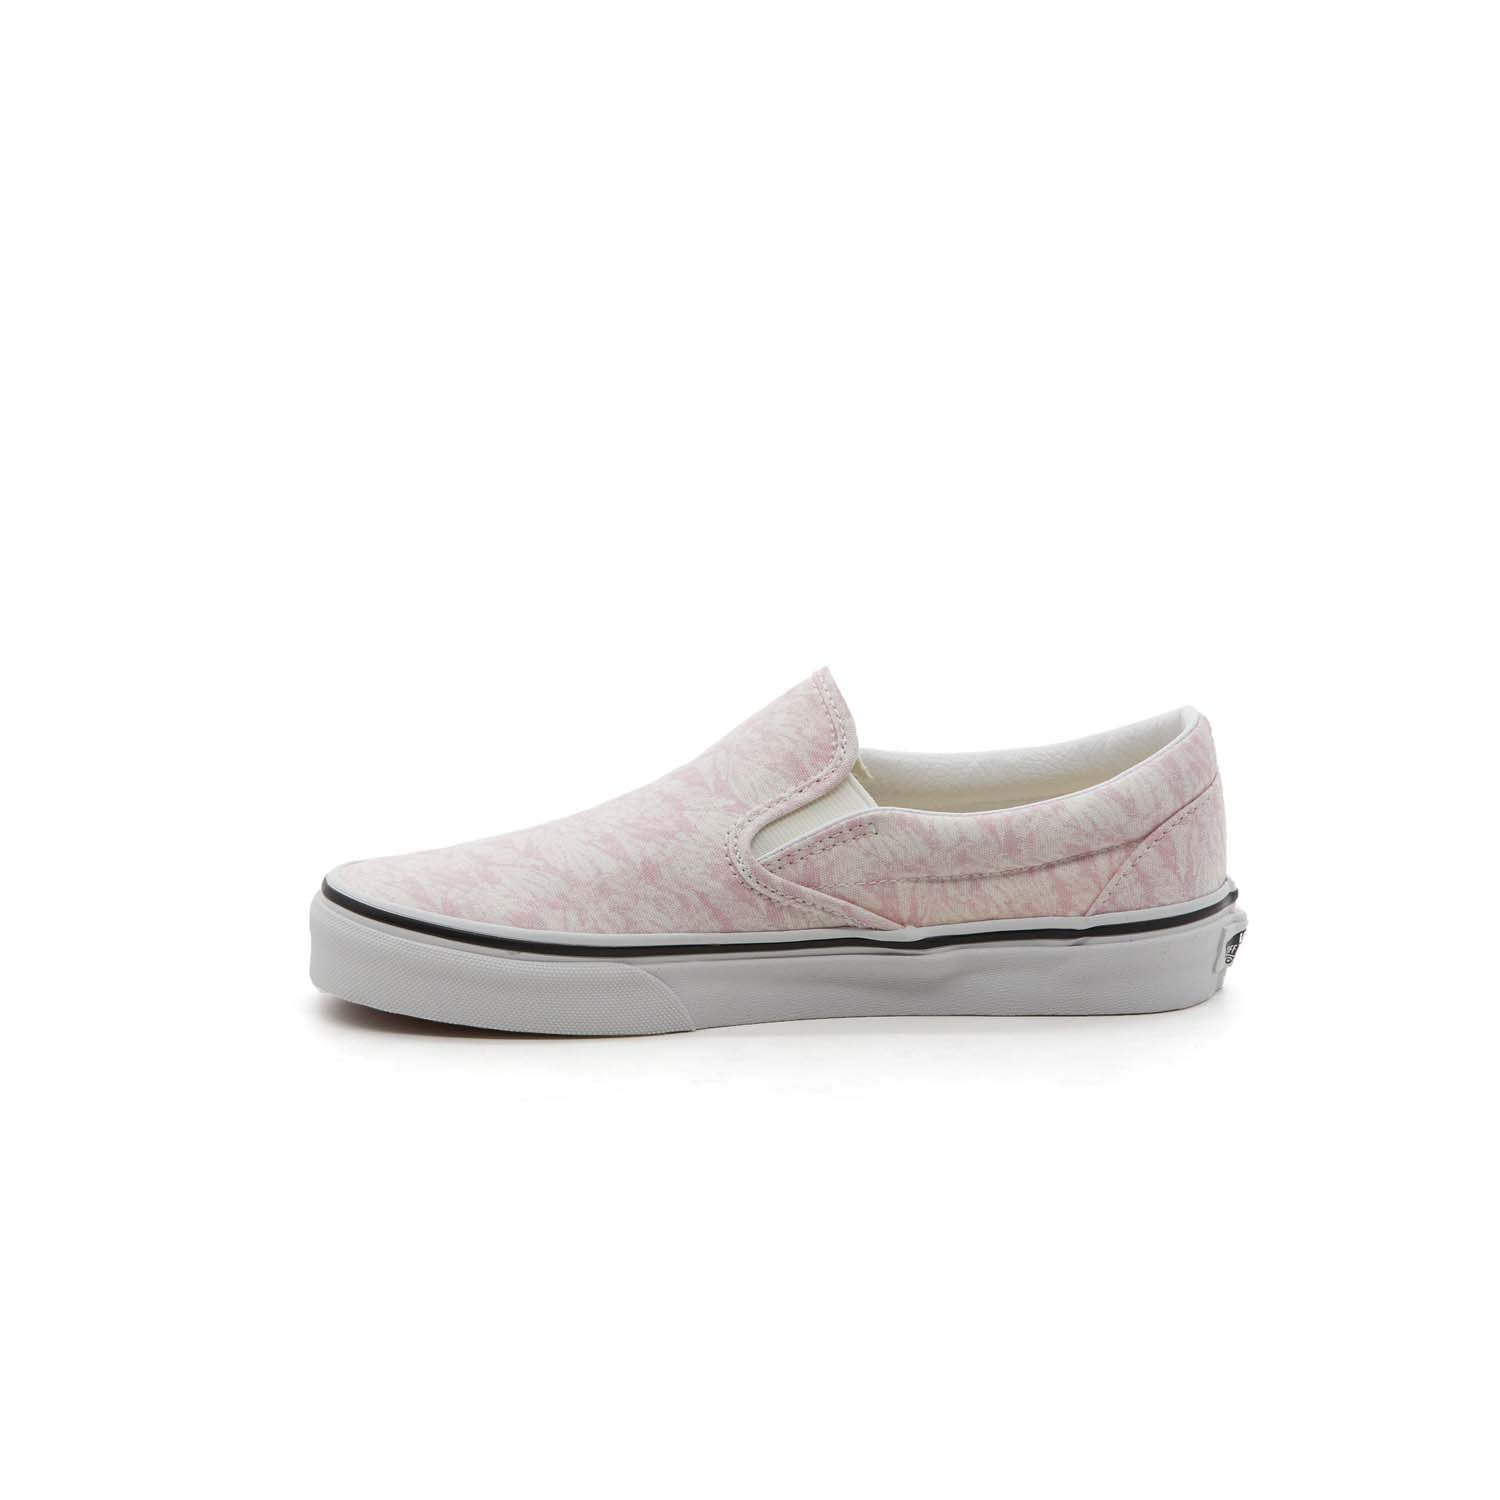 Vans Classic Slip On Washes Rosa